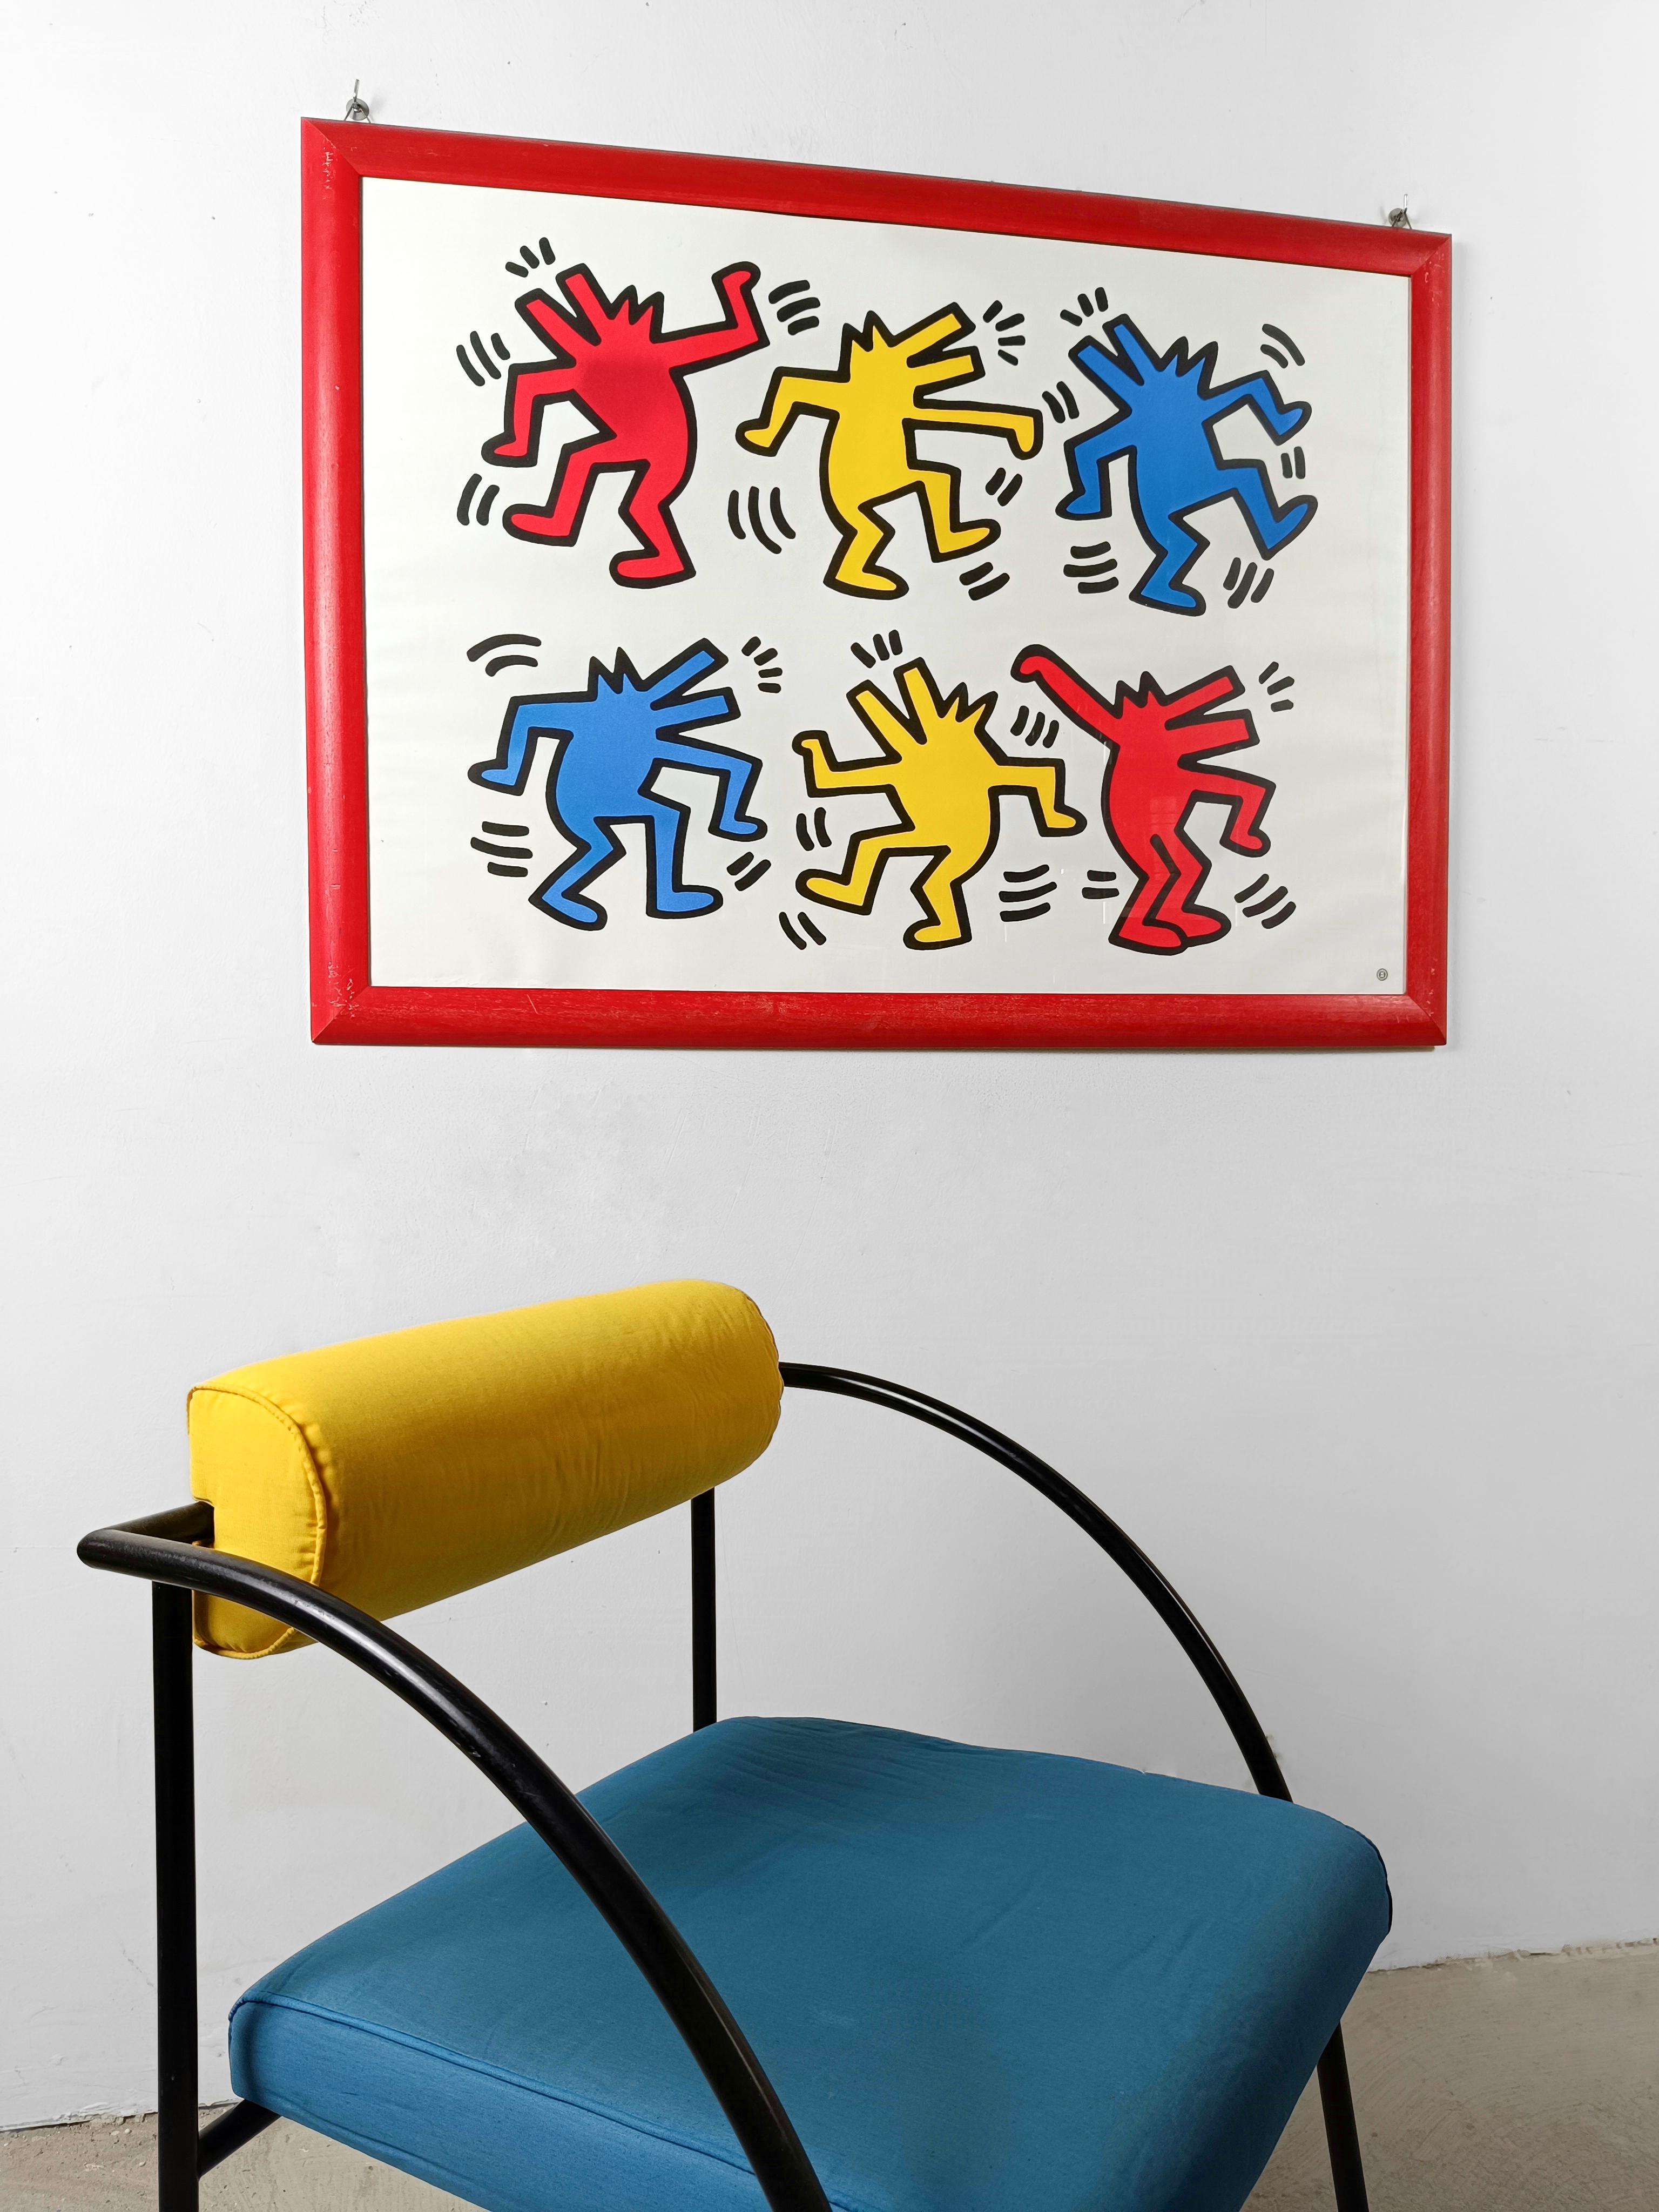 Large Poster printed in 4 colors offset in France by Nouvelles Images S.A. authorized, as visible by the stamp, from the Estate of Keith Haring.

The theme reproduced in this poster is 